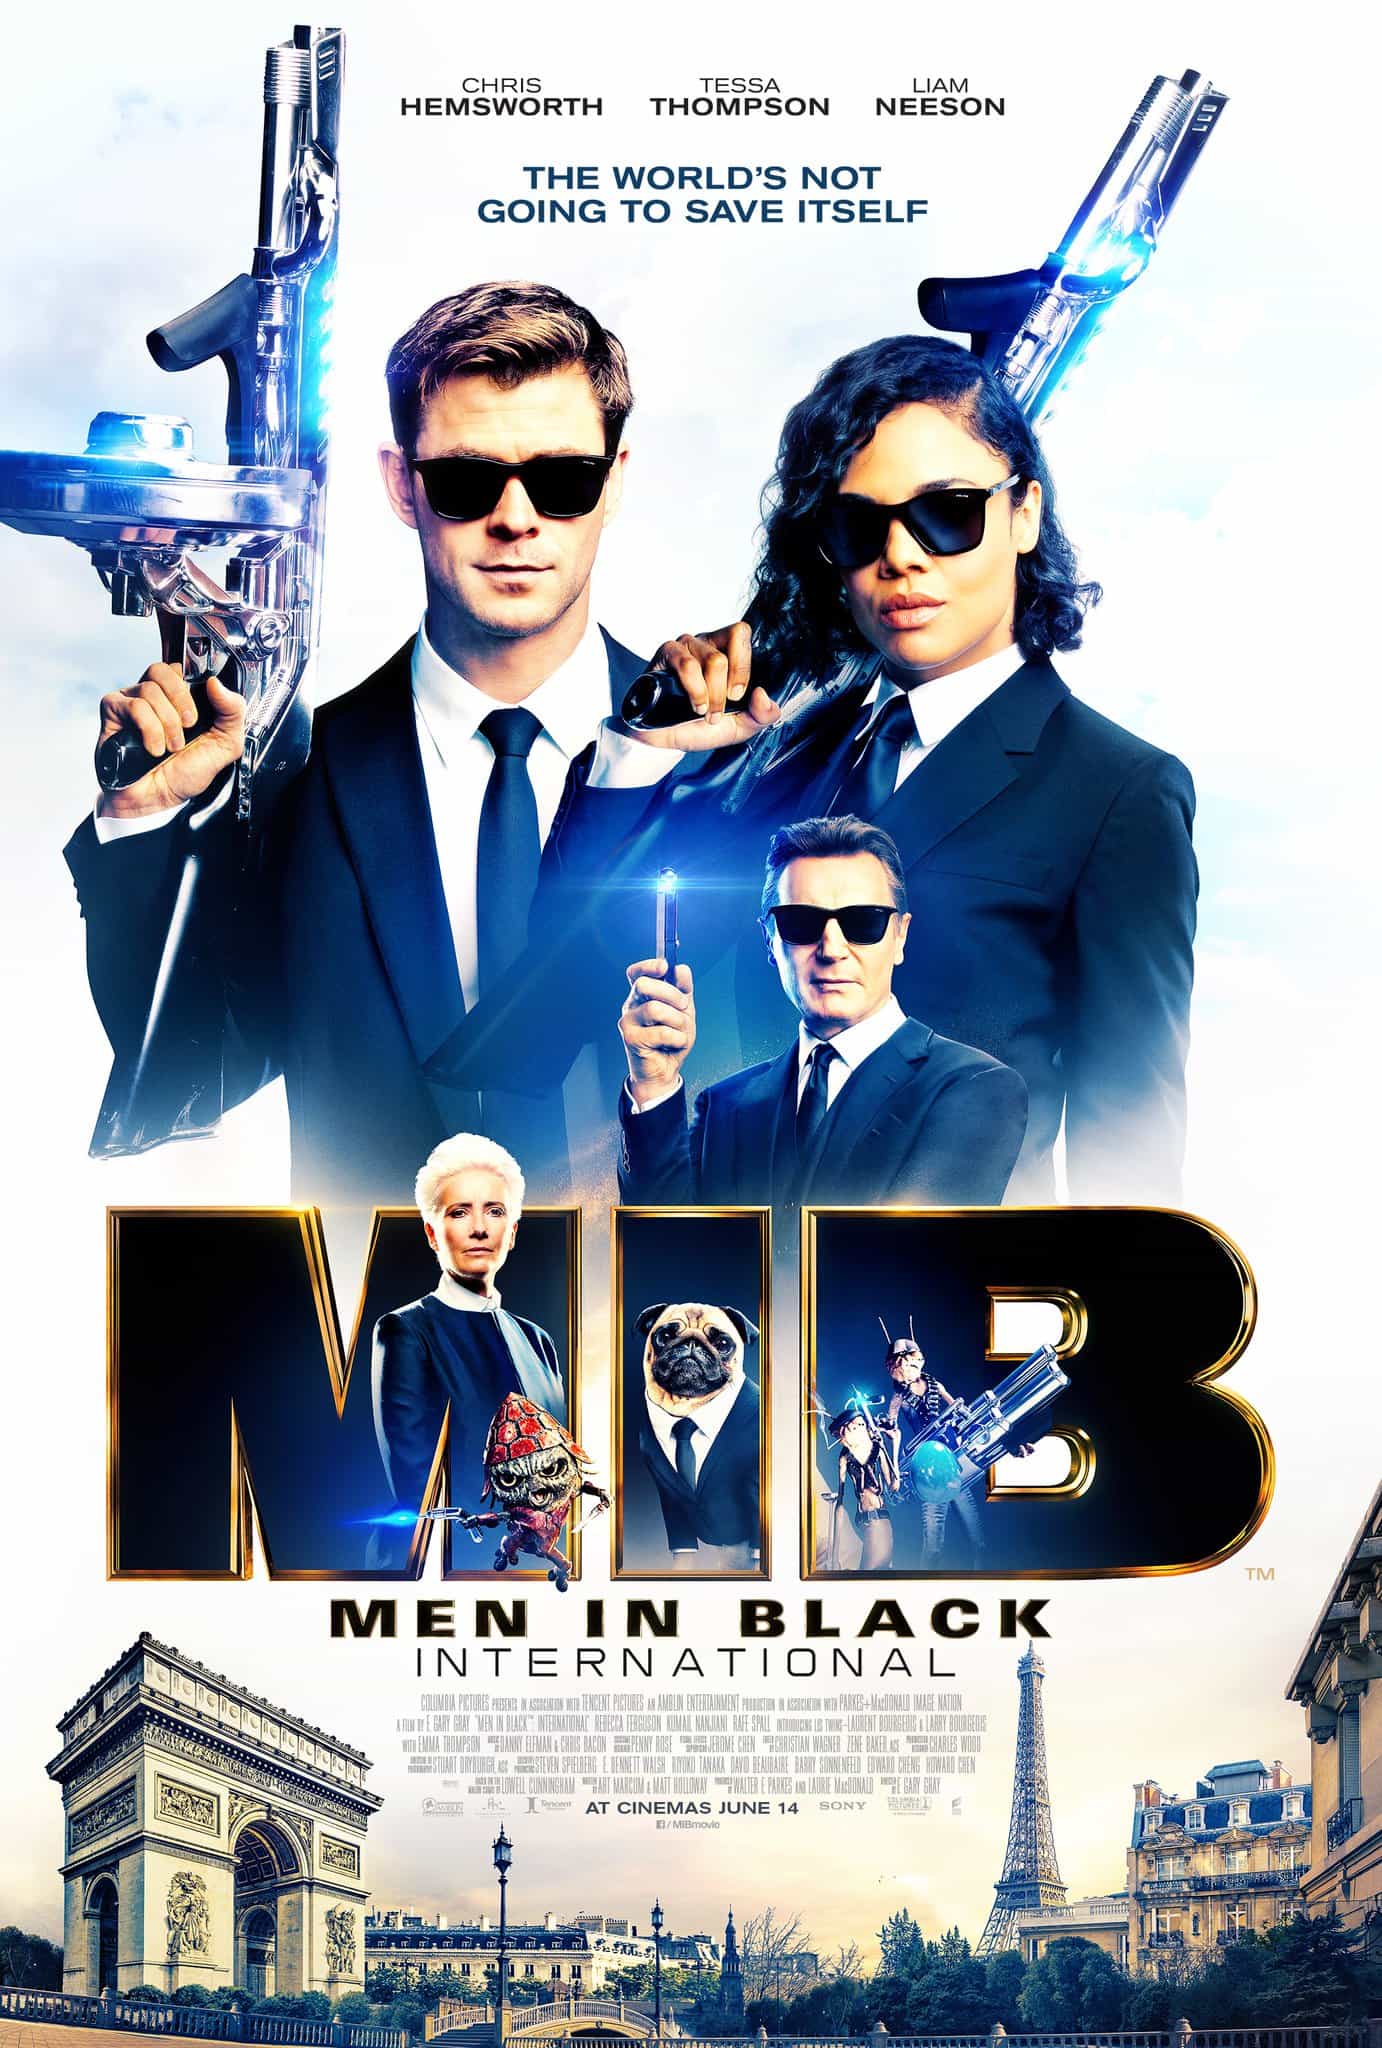 Men In Black International gets a first trailer - and they look good!